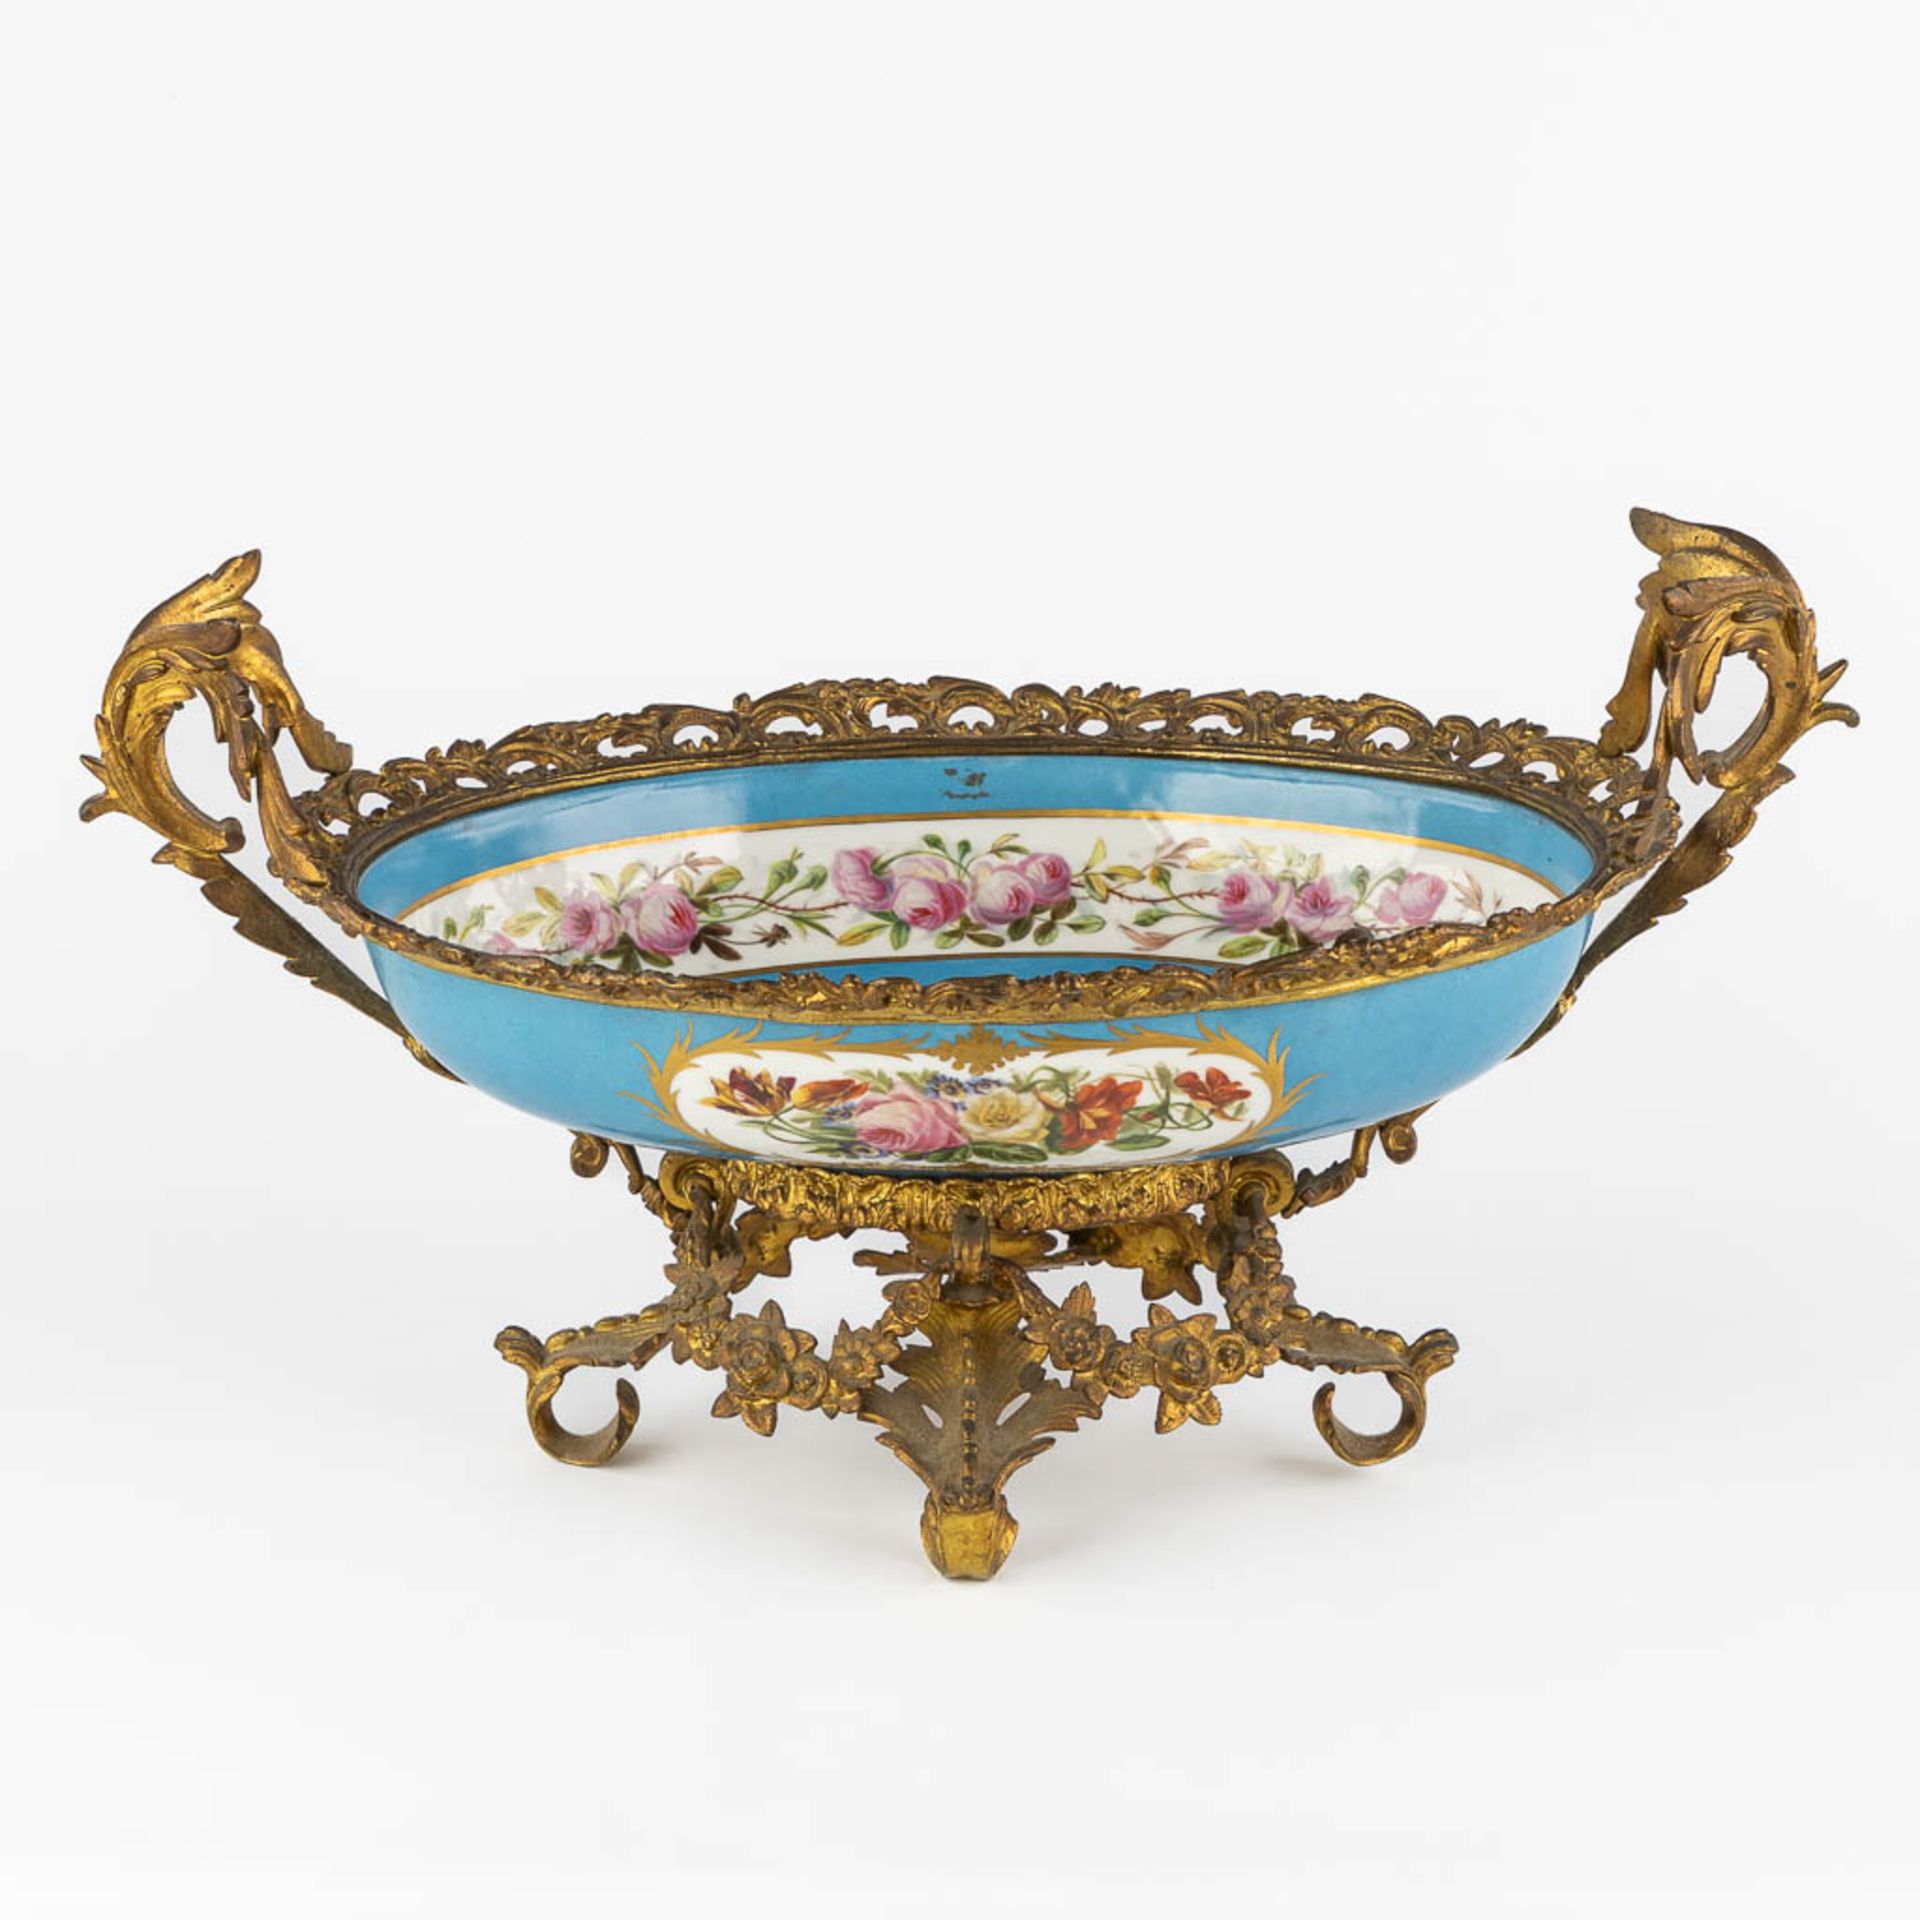 A large bowl with hand painted floral and romantic scne, mounted with gilt bronze. 19th C. (L:32 x